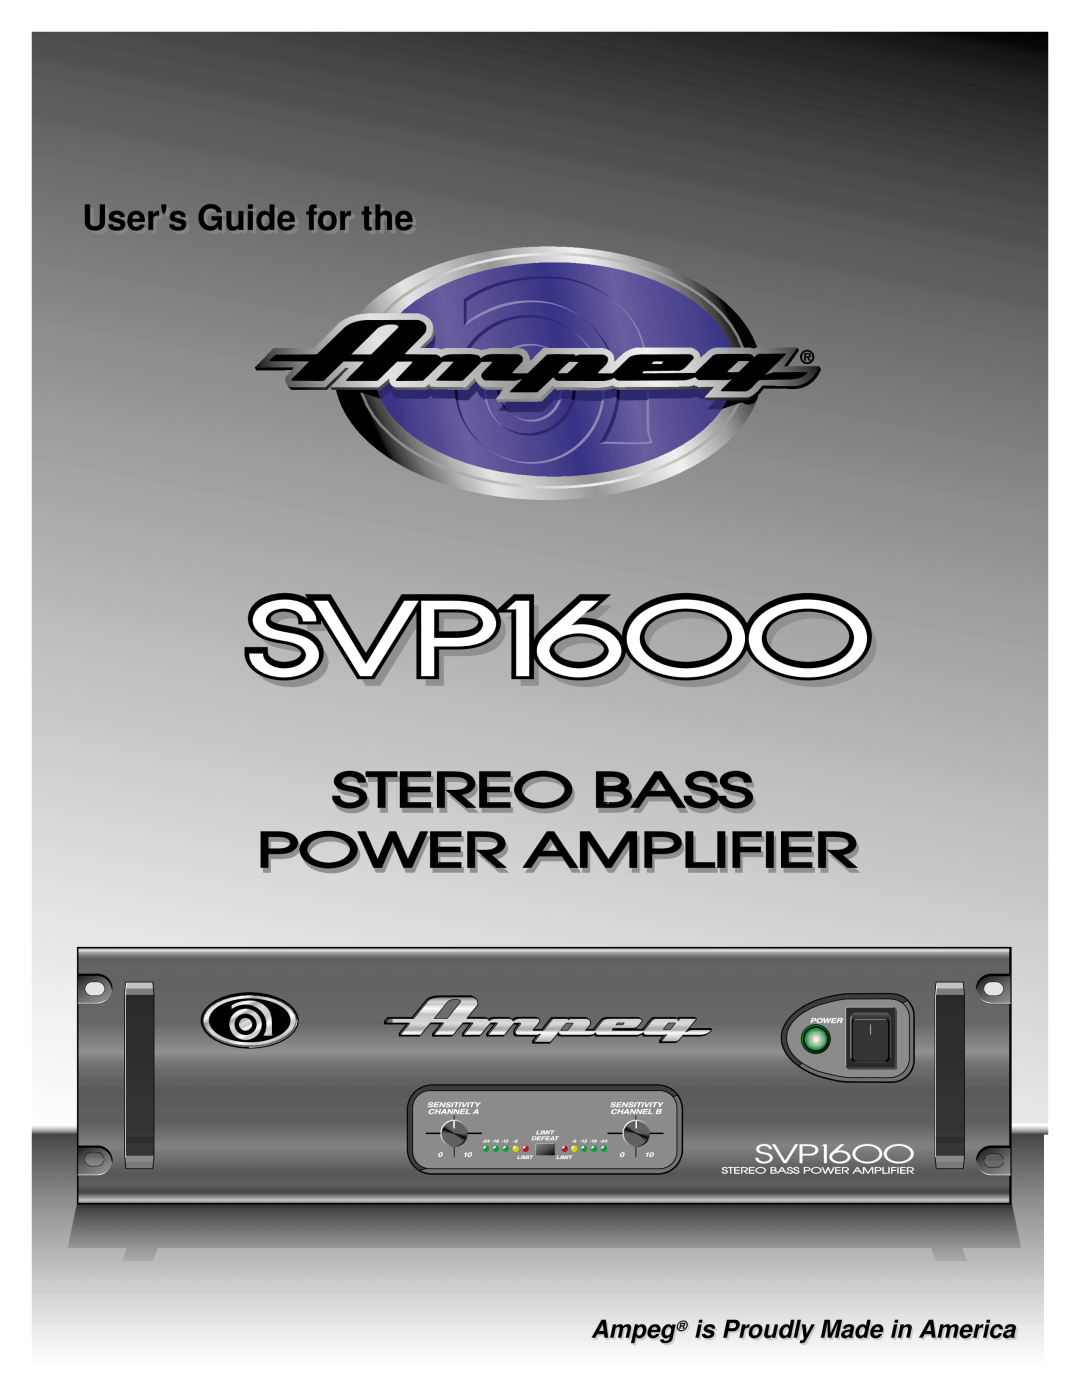 Ampeg SVP1600 manual Ampeg is Proudly Made in America, Usersr Guidei forf r thet 